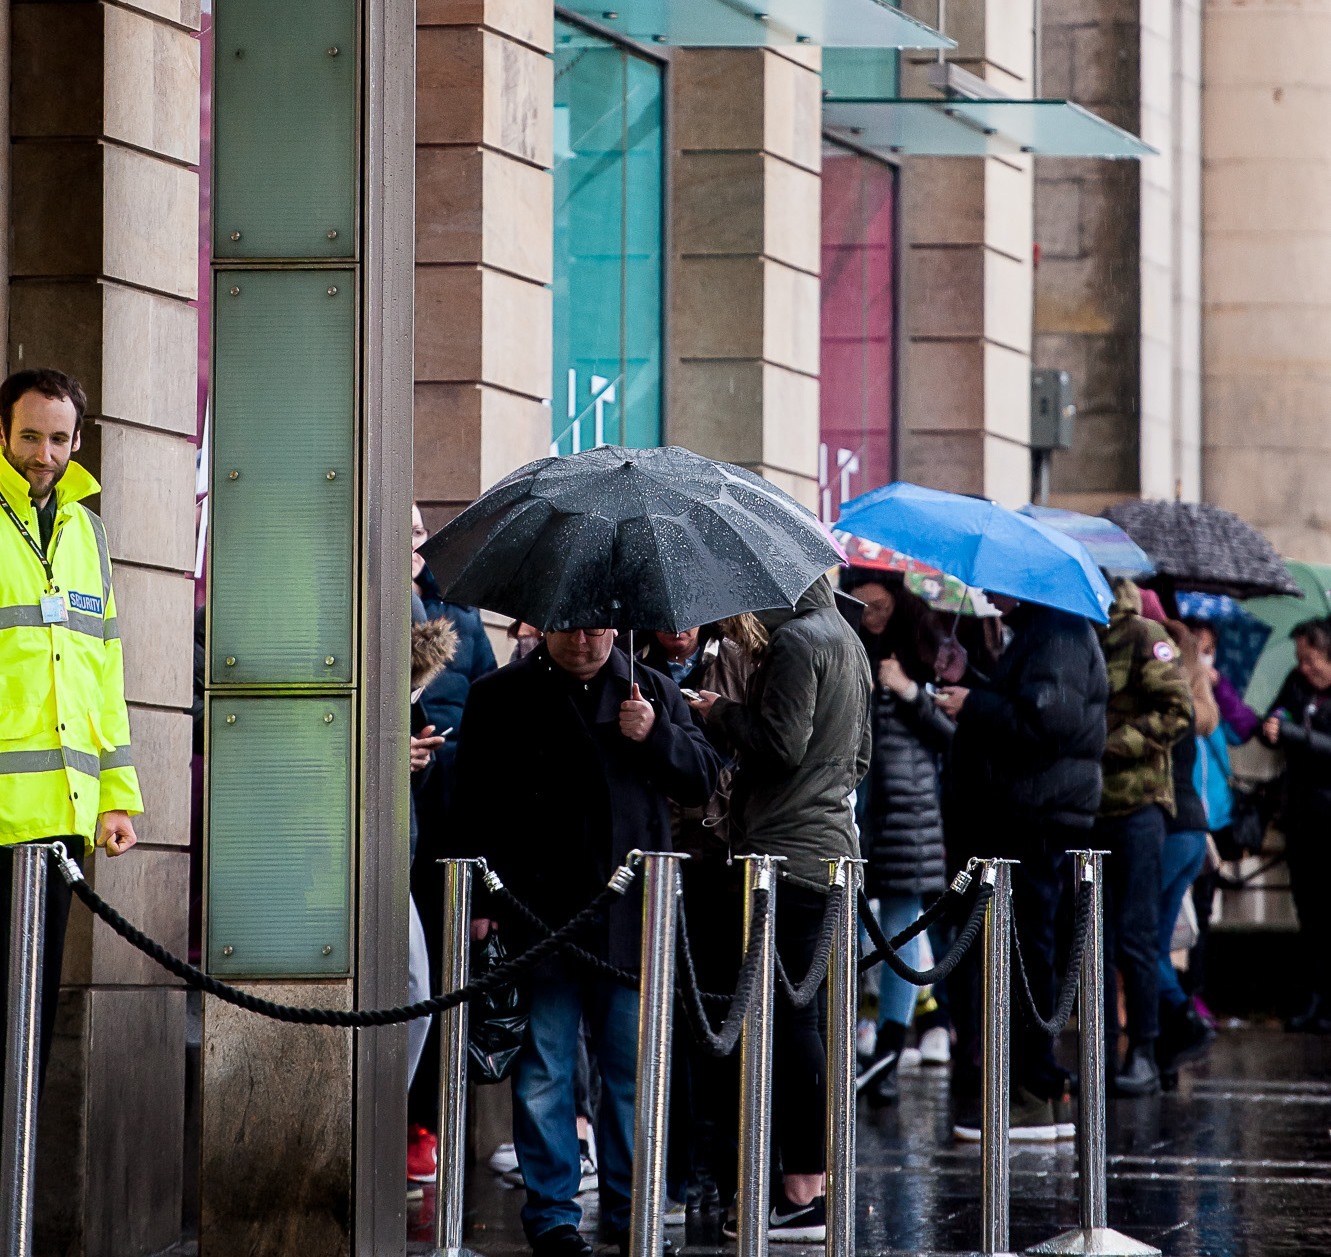 Shoppers hit the traditional Boxing Day sales in Edinburgh ((c) Wullie Marr Photography)